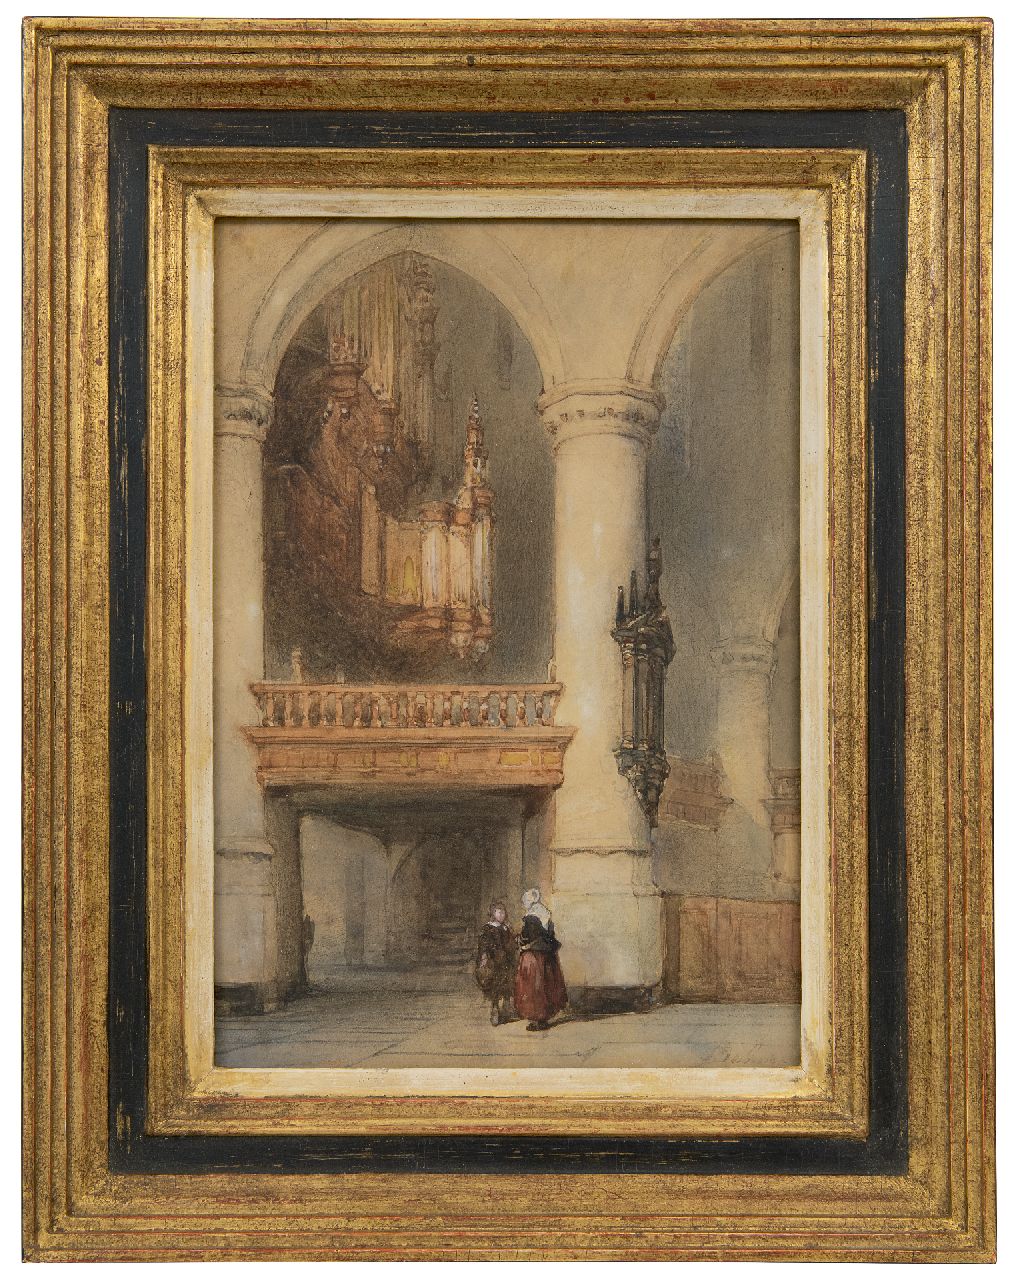 Bosboom J.  | Johannes Bosboom, Interior or the oude Kerk in Delft, chalk and watercolour on paper 28.2 x 19.5 cm, signed l.r. and ca. 1855